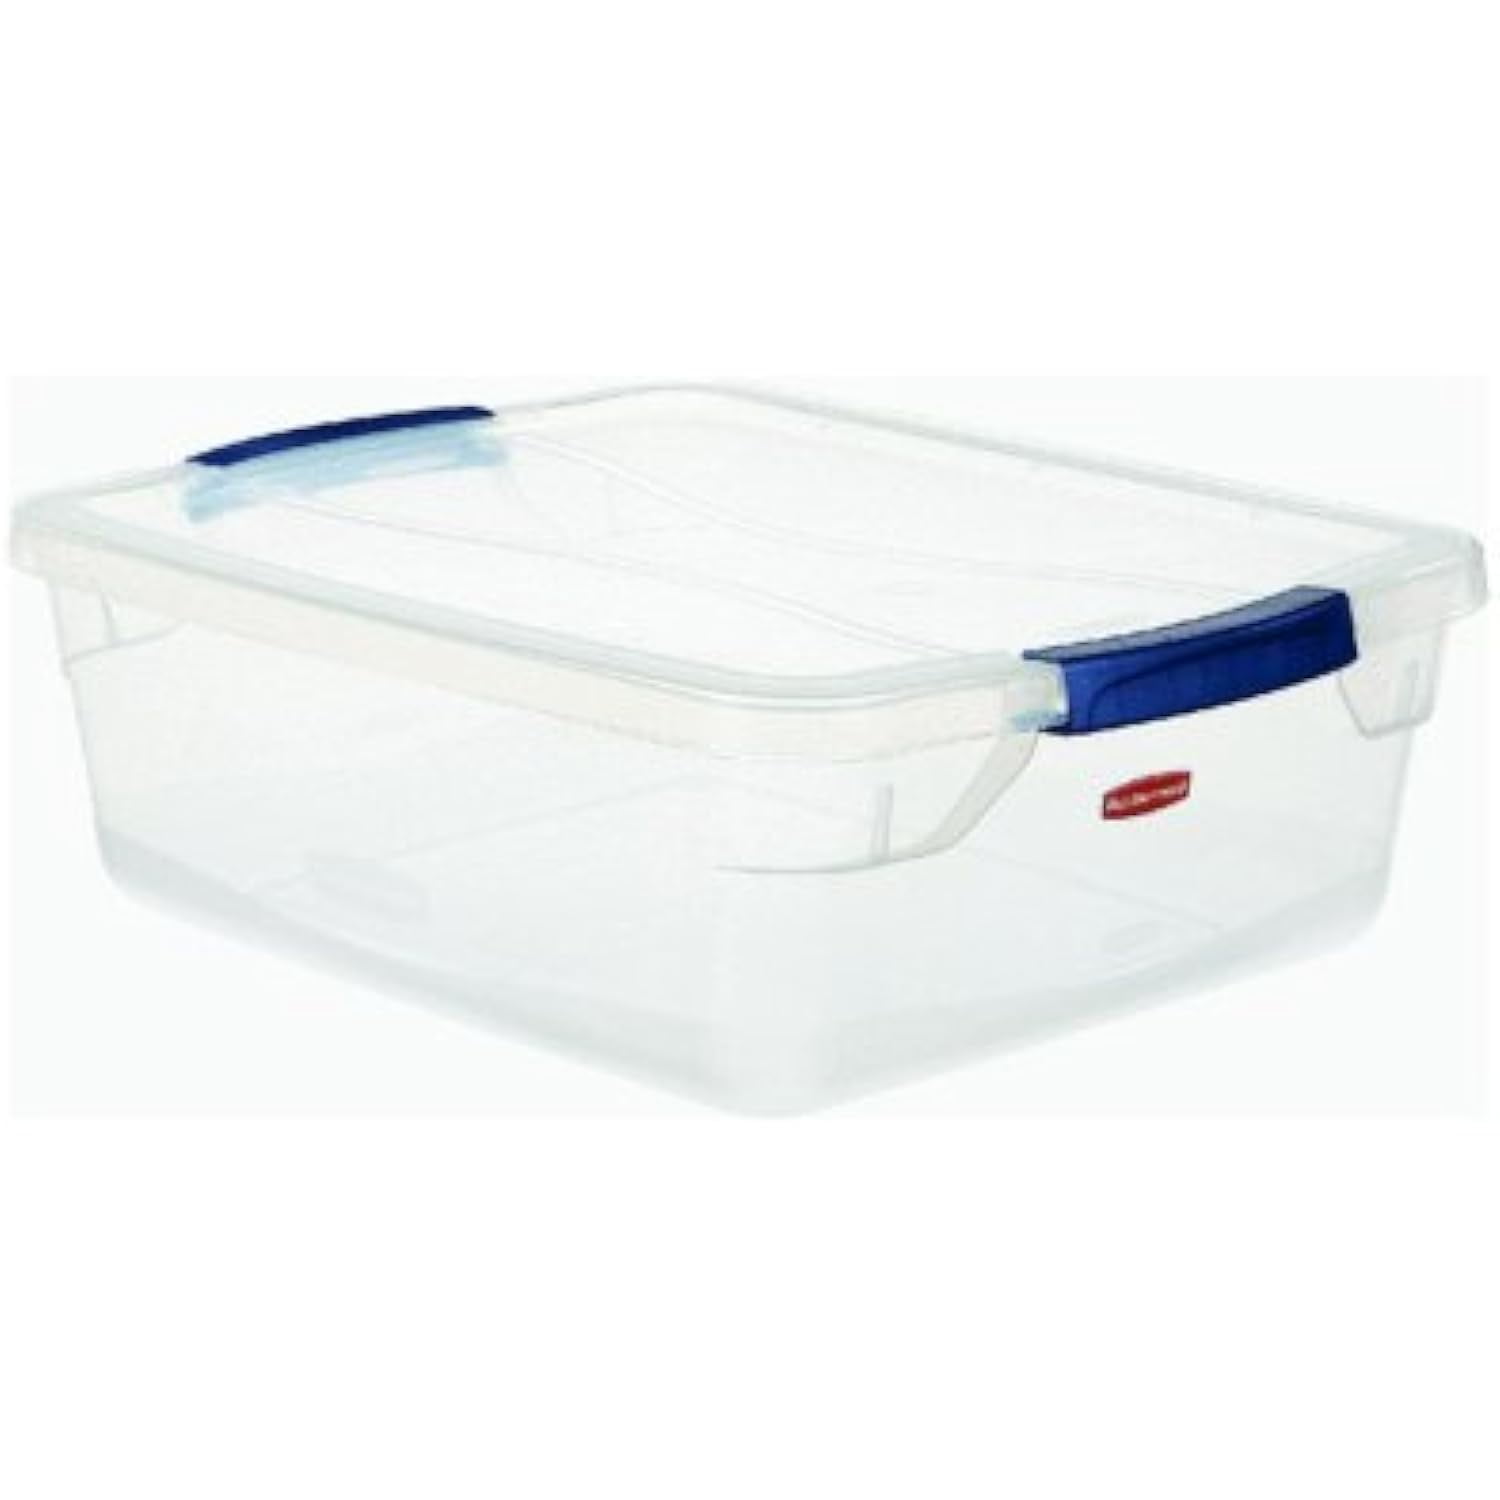 Clever Store Basic Latch-Lid Container by Rubbermaid® UNXRMCC410001